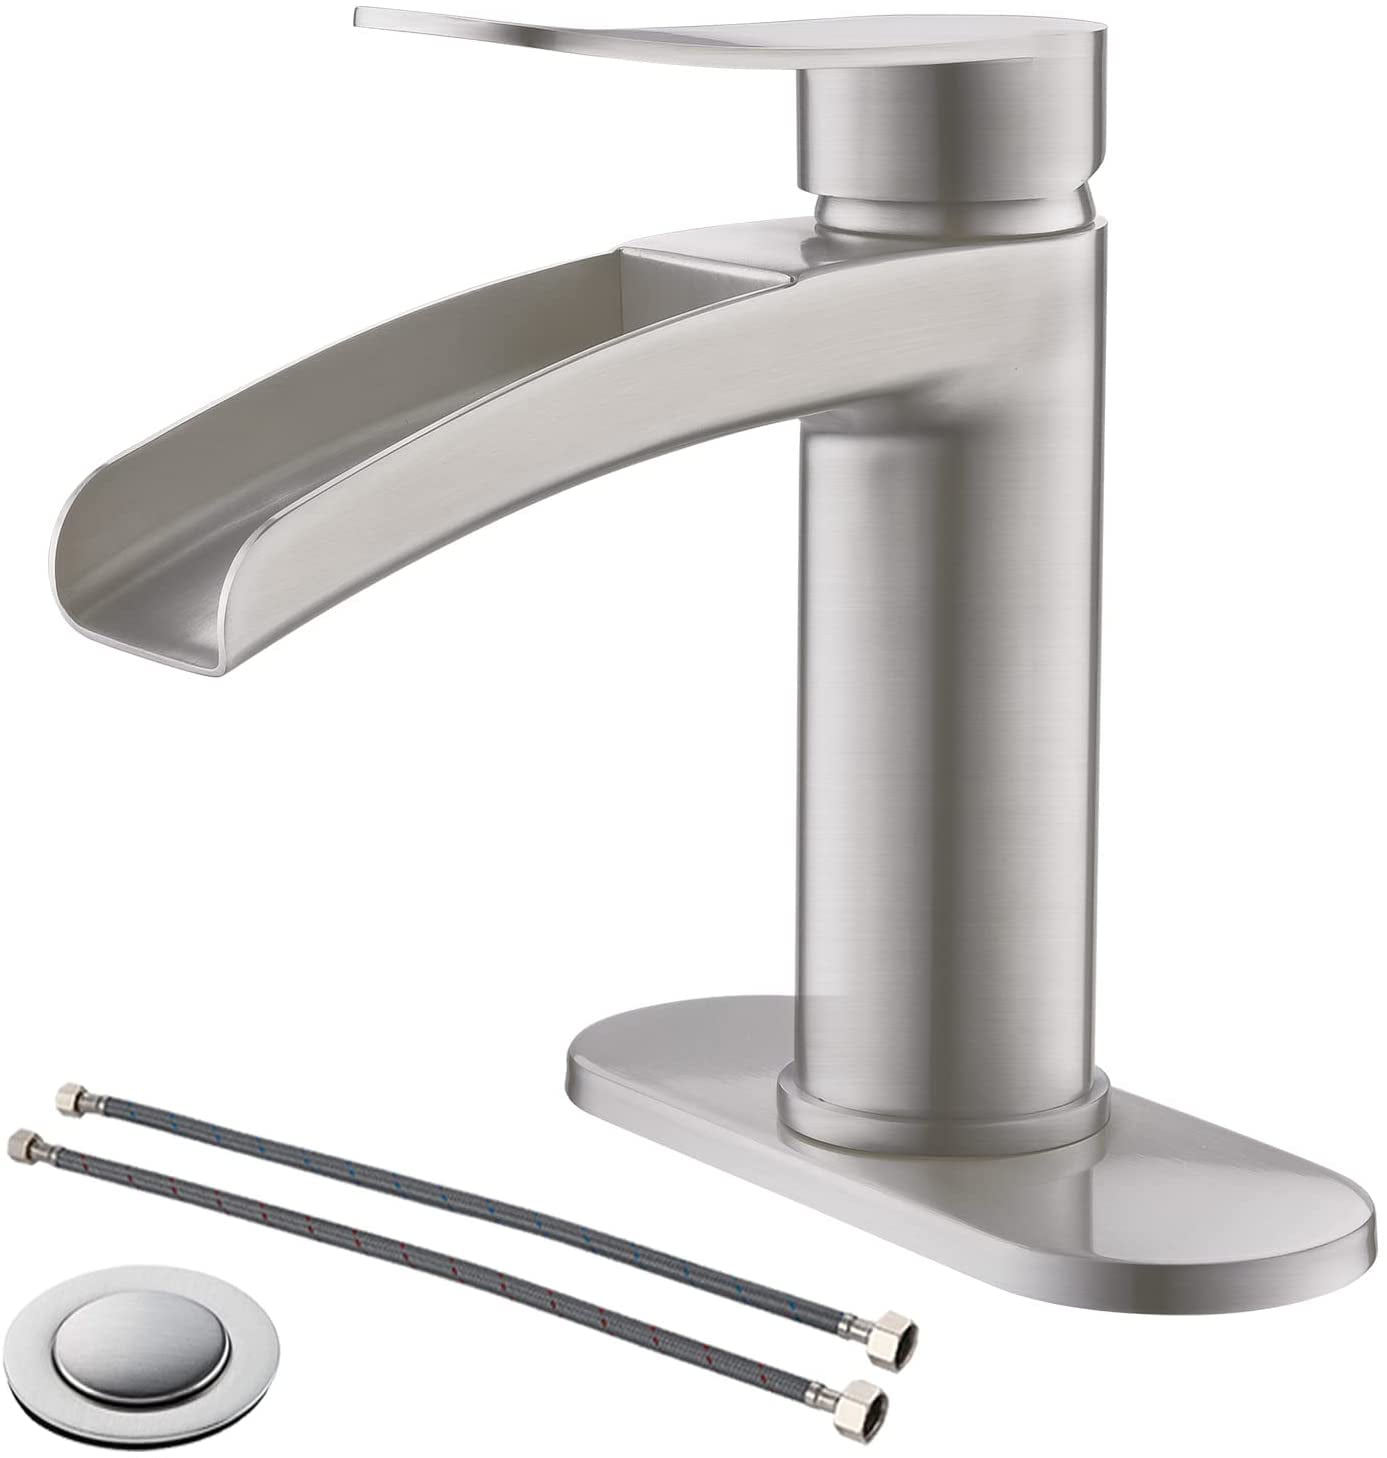 Brushed Nickel Sink Faucet Waterfall Bathroom Mixer Tap Deck Mounted With Plate